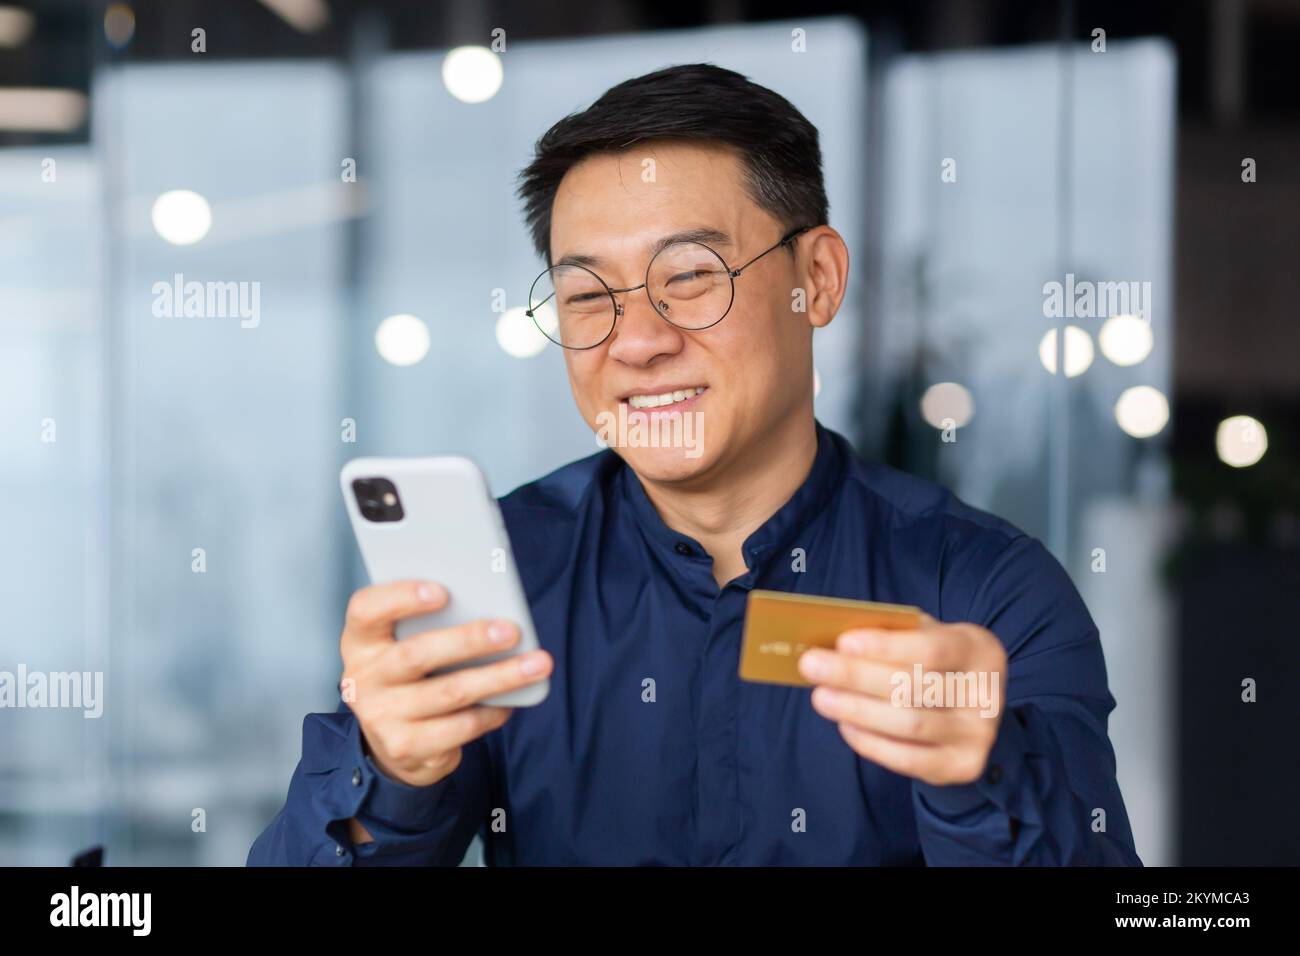 Successful and smiling asian businessman in office making bank transfer and online purchase in online store, man using app on phone and bank credit card, close up inside. Stock Photo